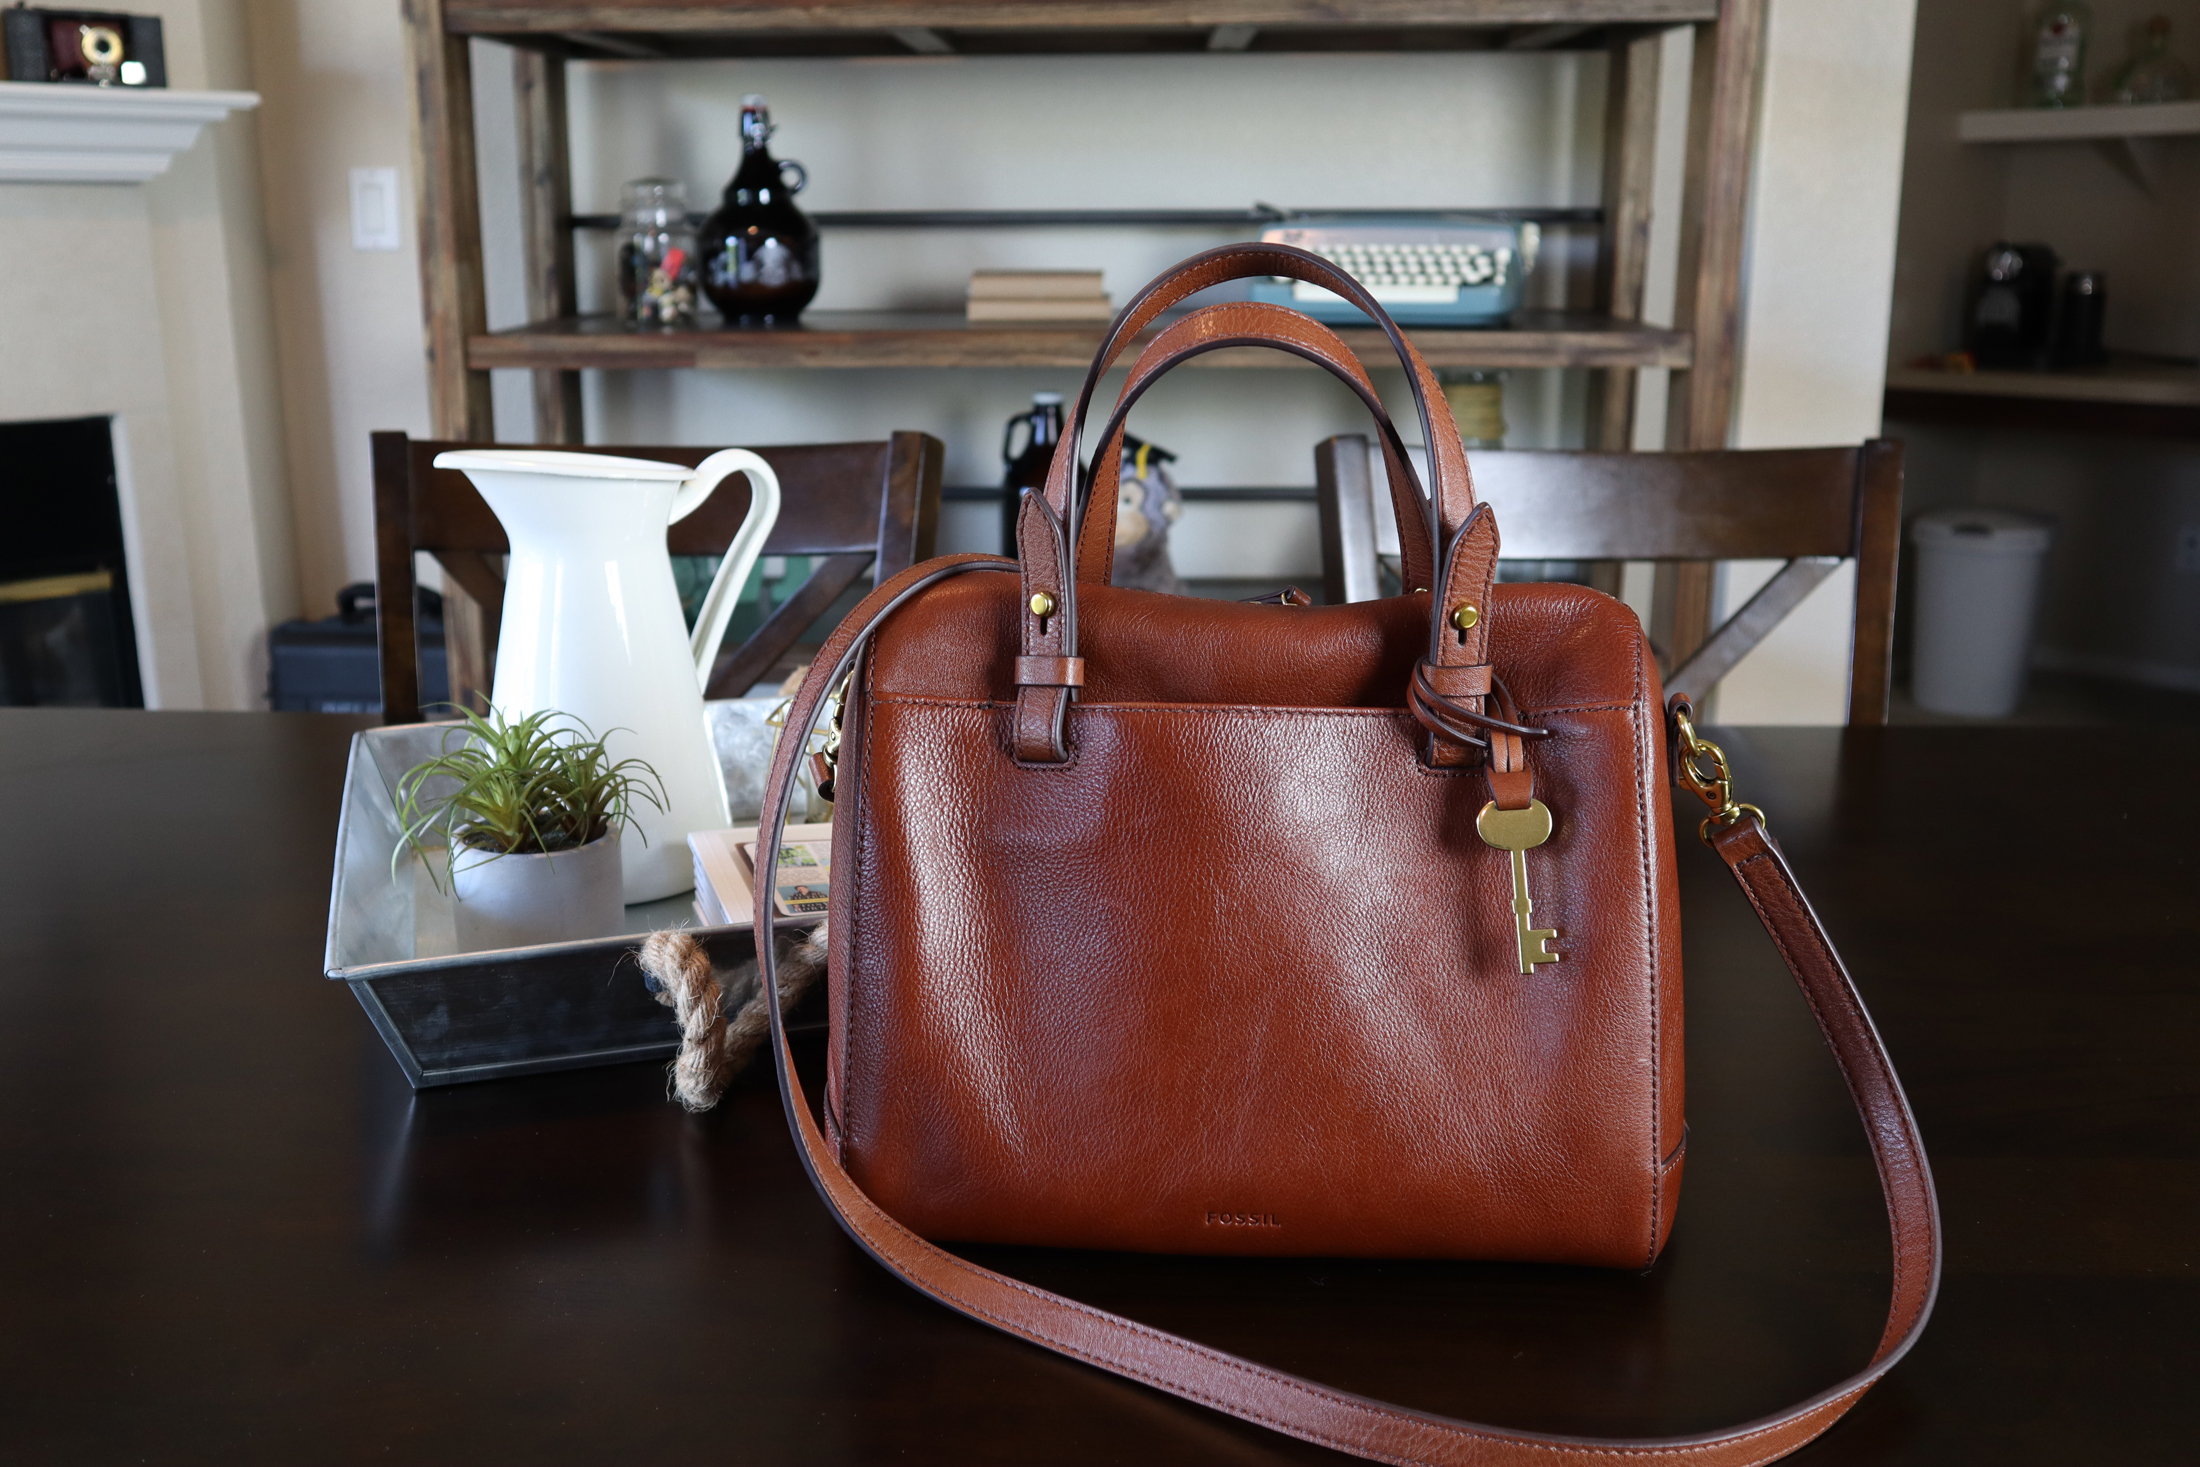 What's In My Bag? Fossil Sydney Satchel 